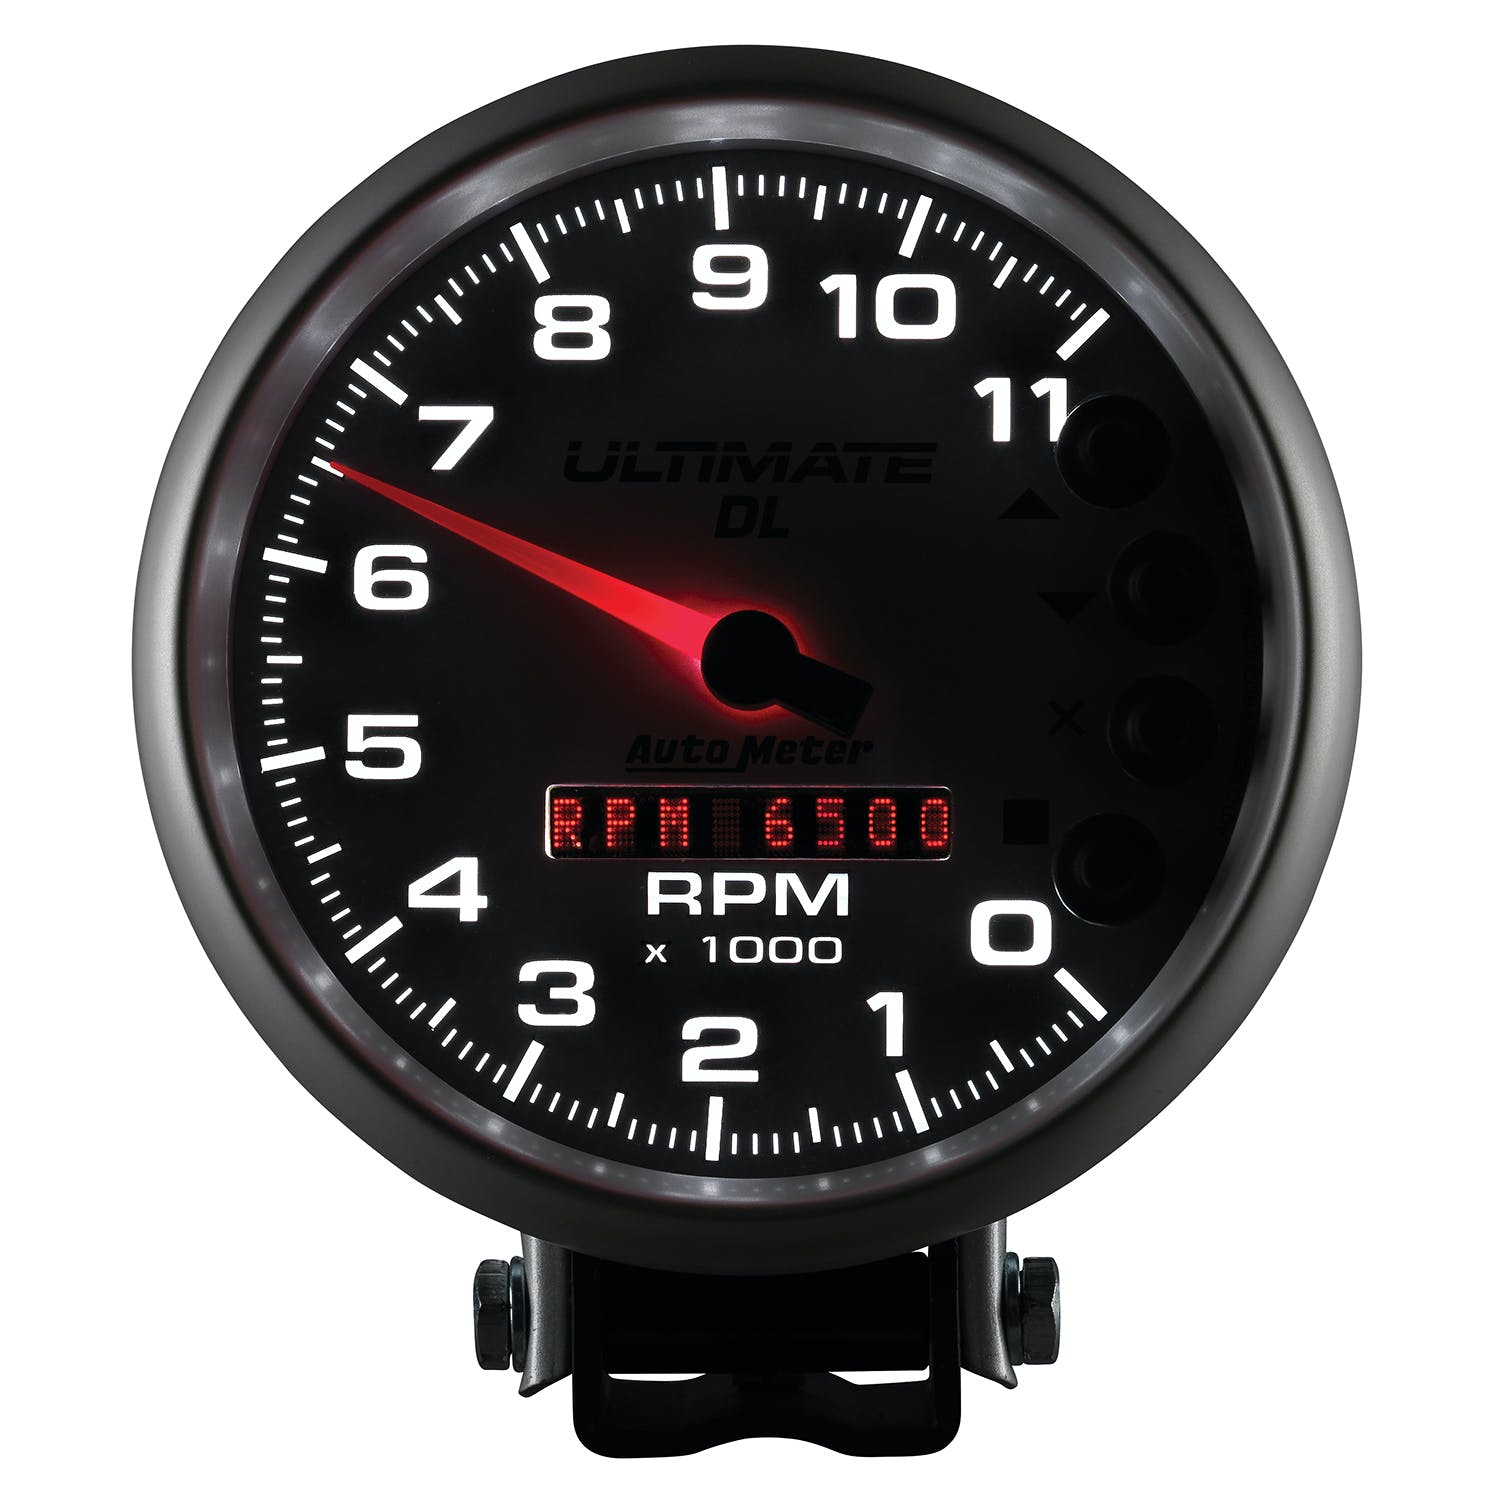 AutoMeter Products 6895 5 Ultimate DL (+ pressure, wideband, G-Meter), 11,000 RPM, Silver